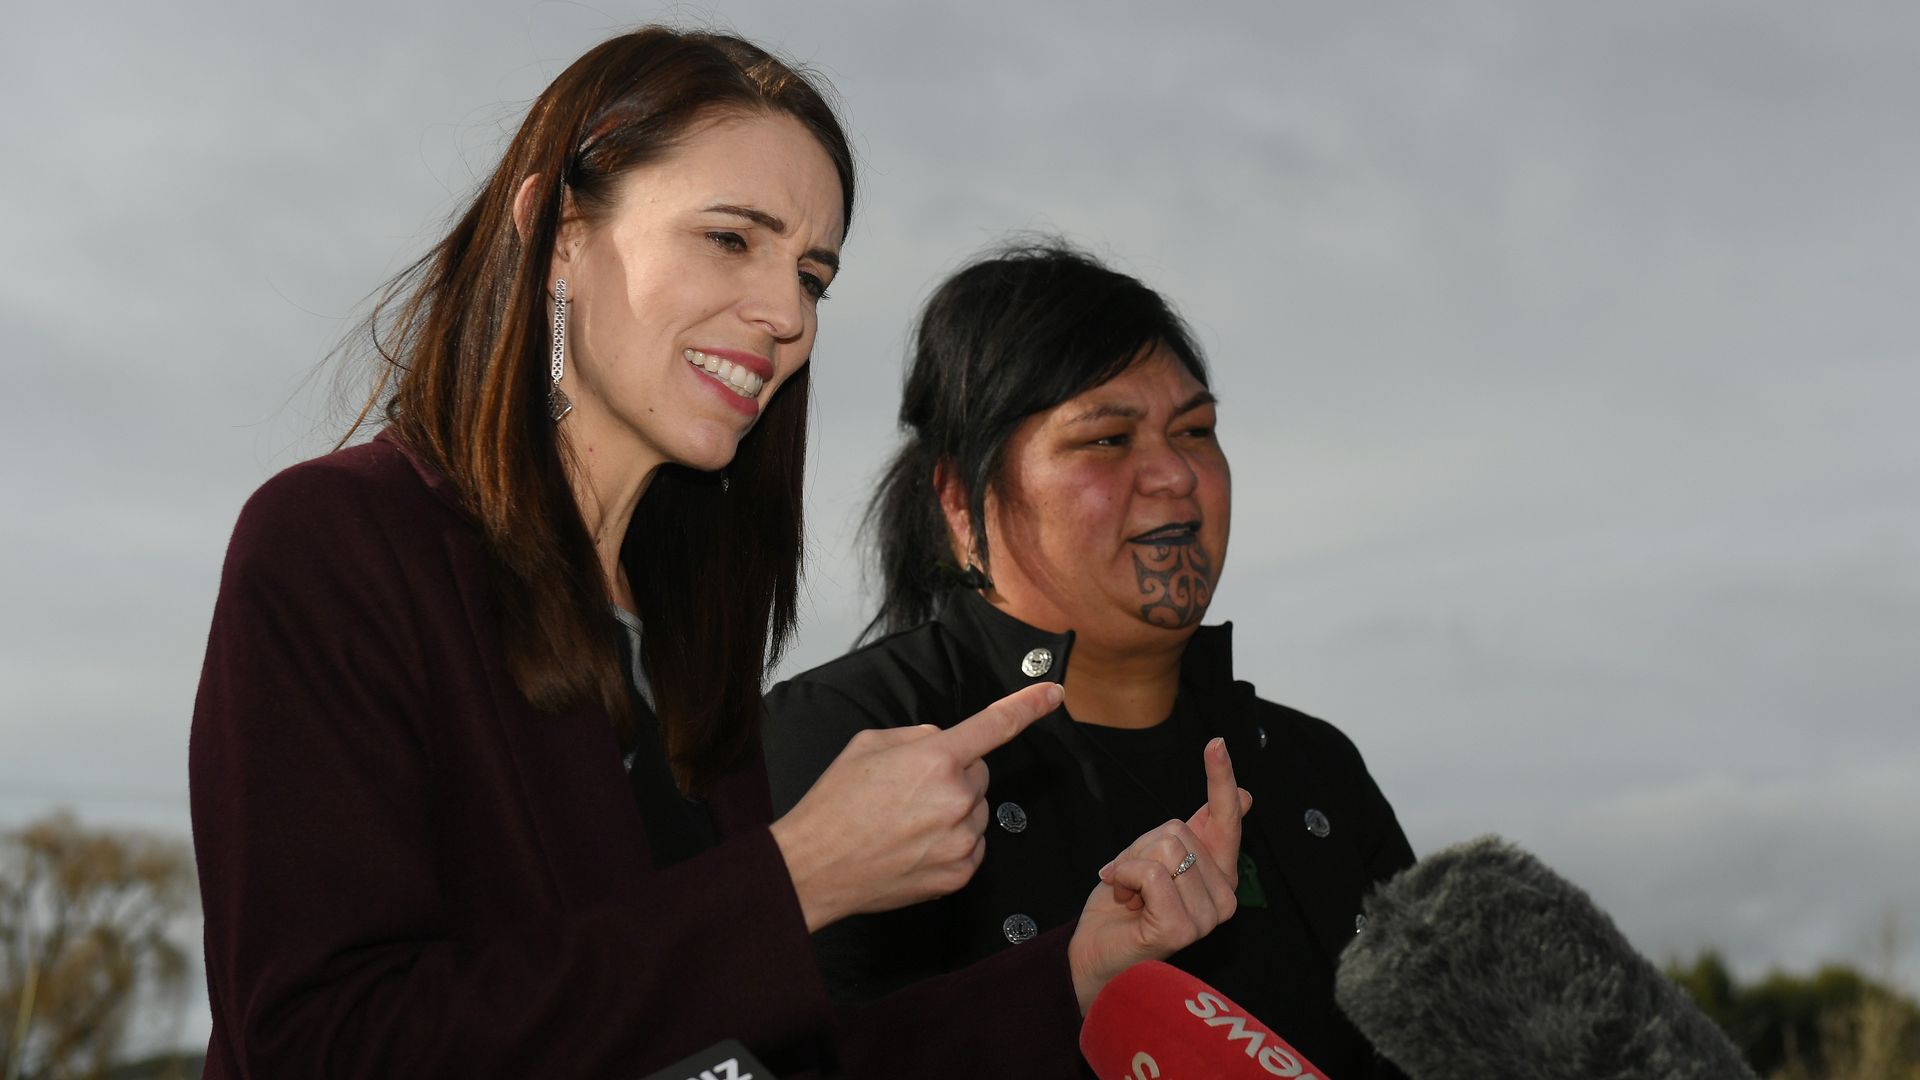 Prime Minister Jacinda Ardern with Local Government Minister Nanaia Mahuta following an announcement about upgrading drinking water infrastructure on July 08, 2020 in Hastings, New Zealand.